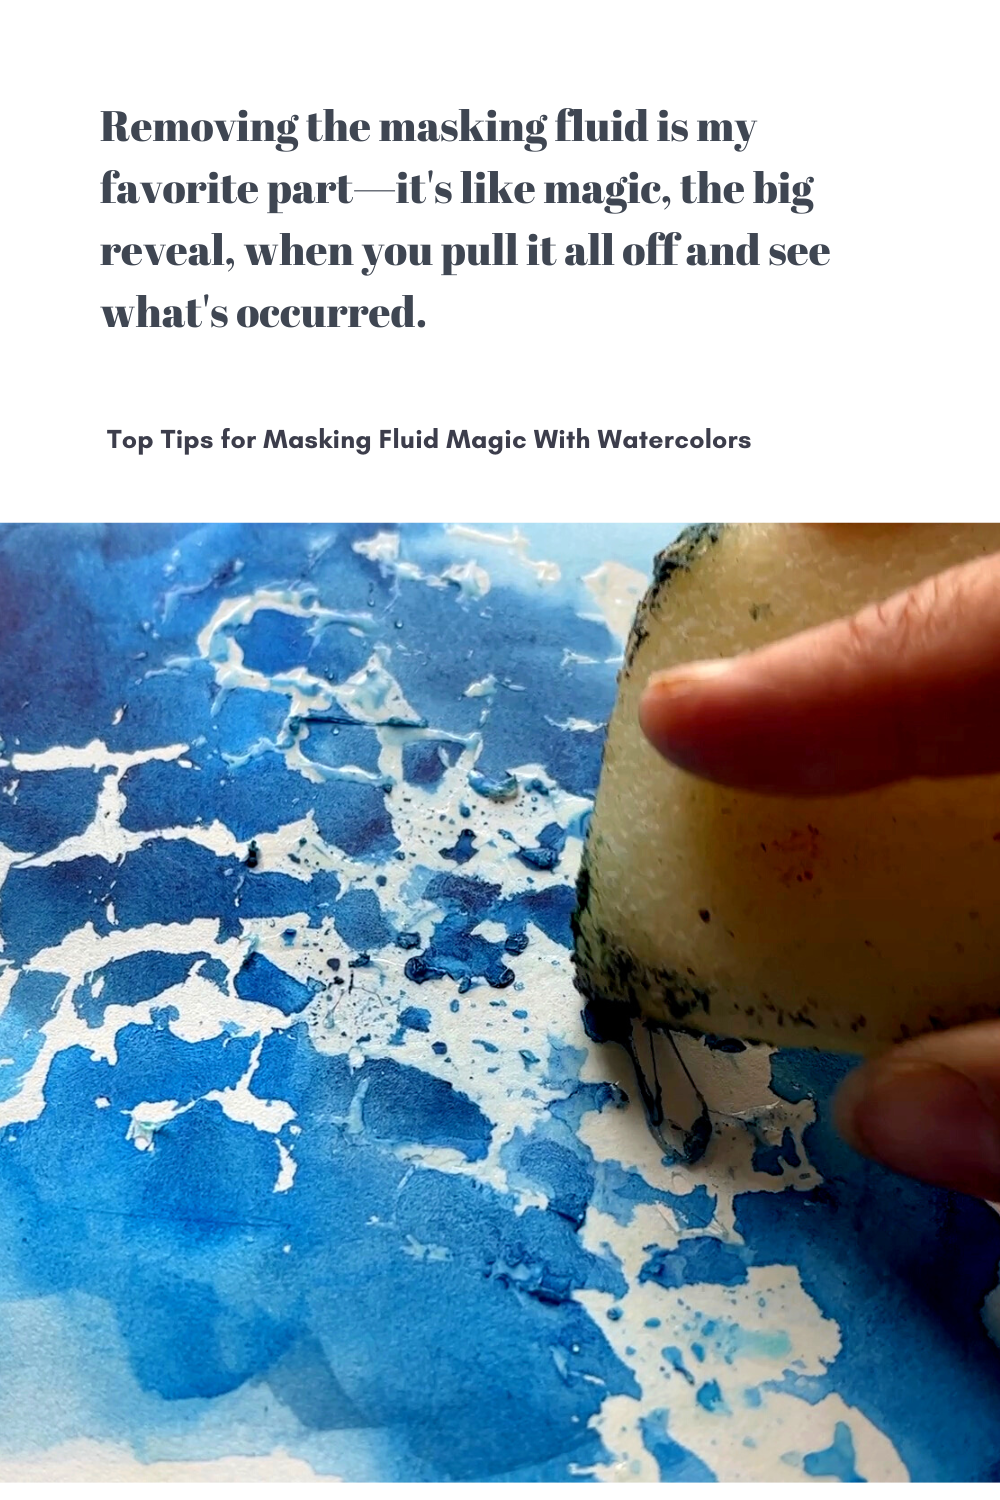 Top Tips for Masking Fluid Magic with Watercolors — Ohn Mar Win Illustration